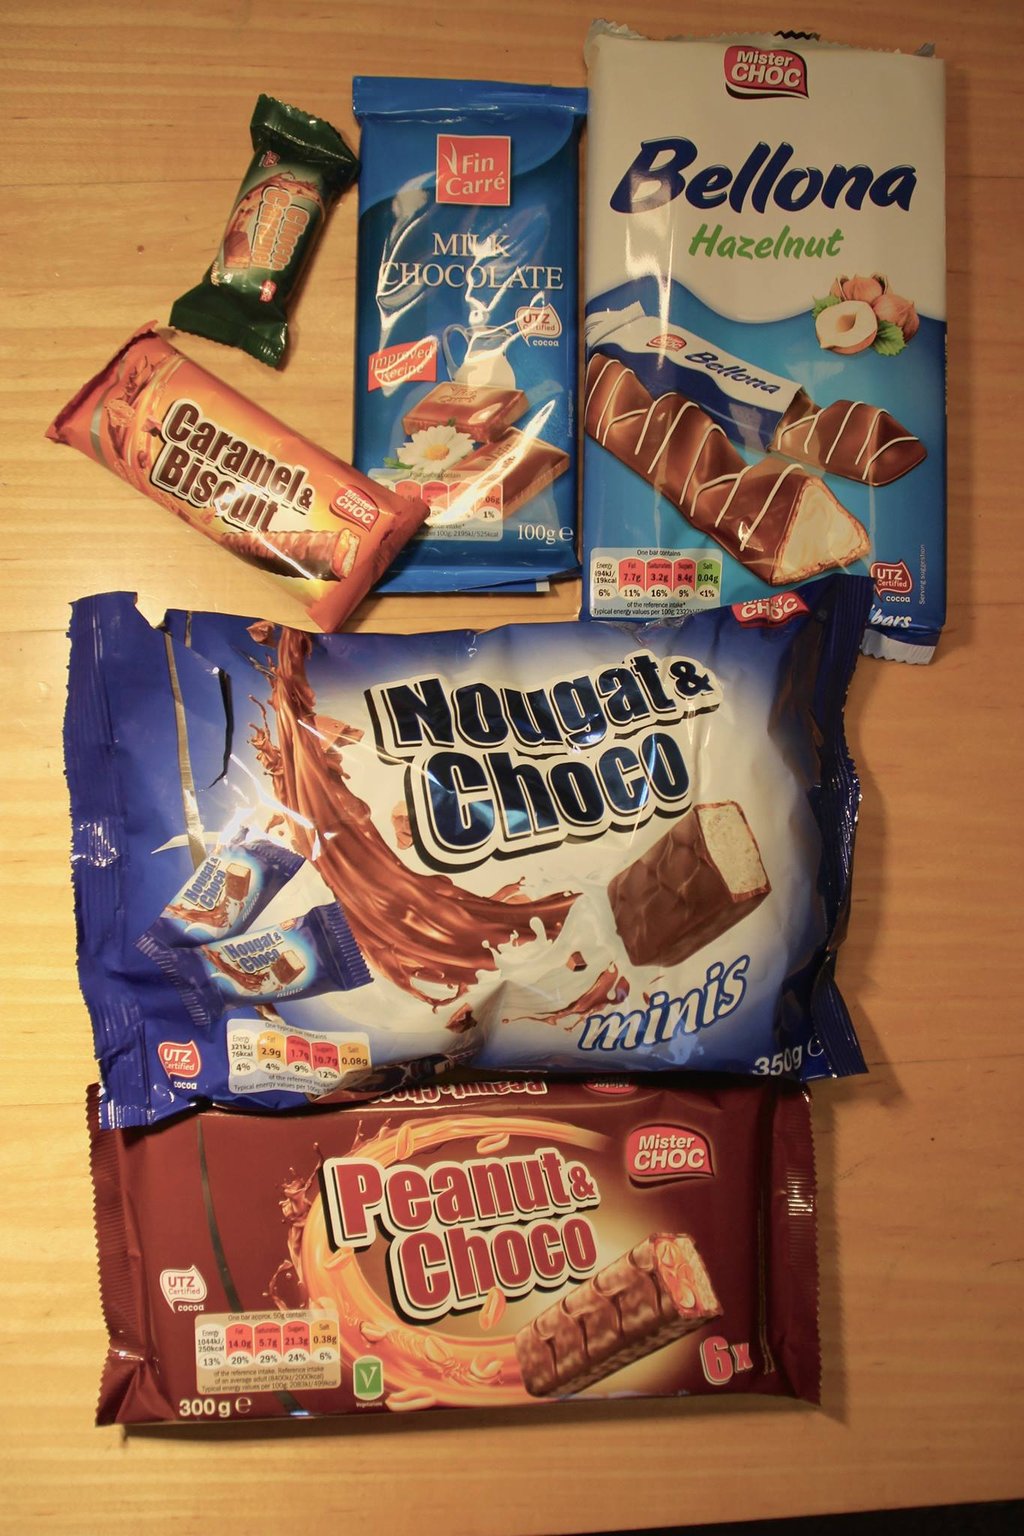 A Comparison of Lidl Chocolates to Name Brand Chocolate Bars